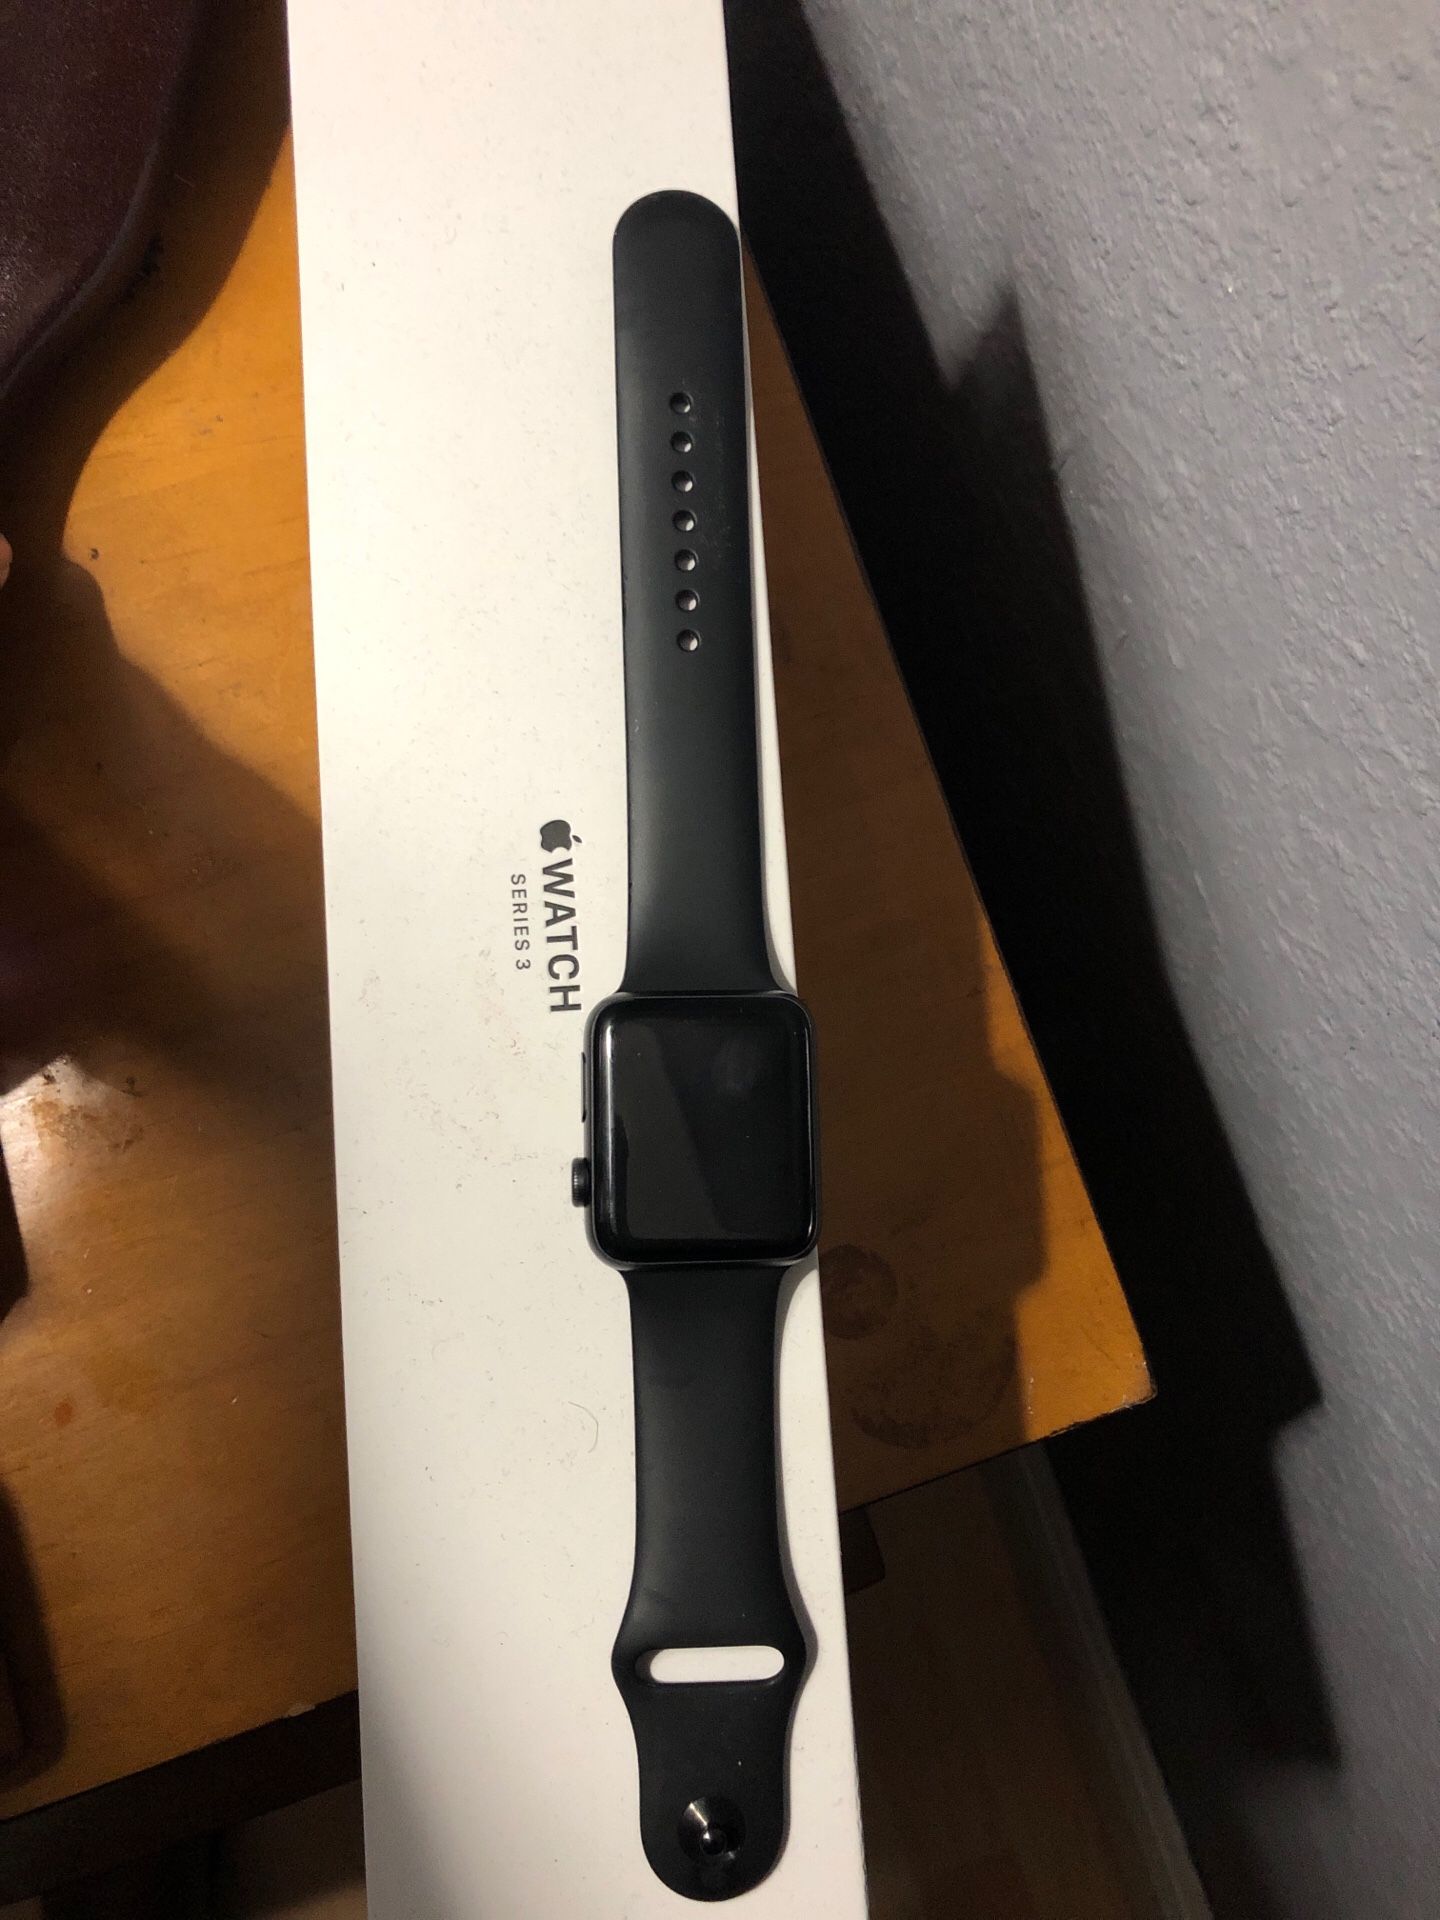 Apple Watch series 3 with cellular